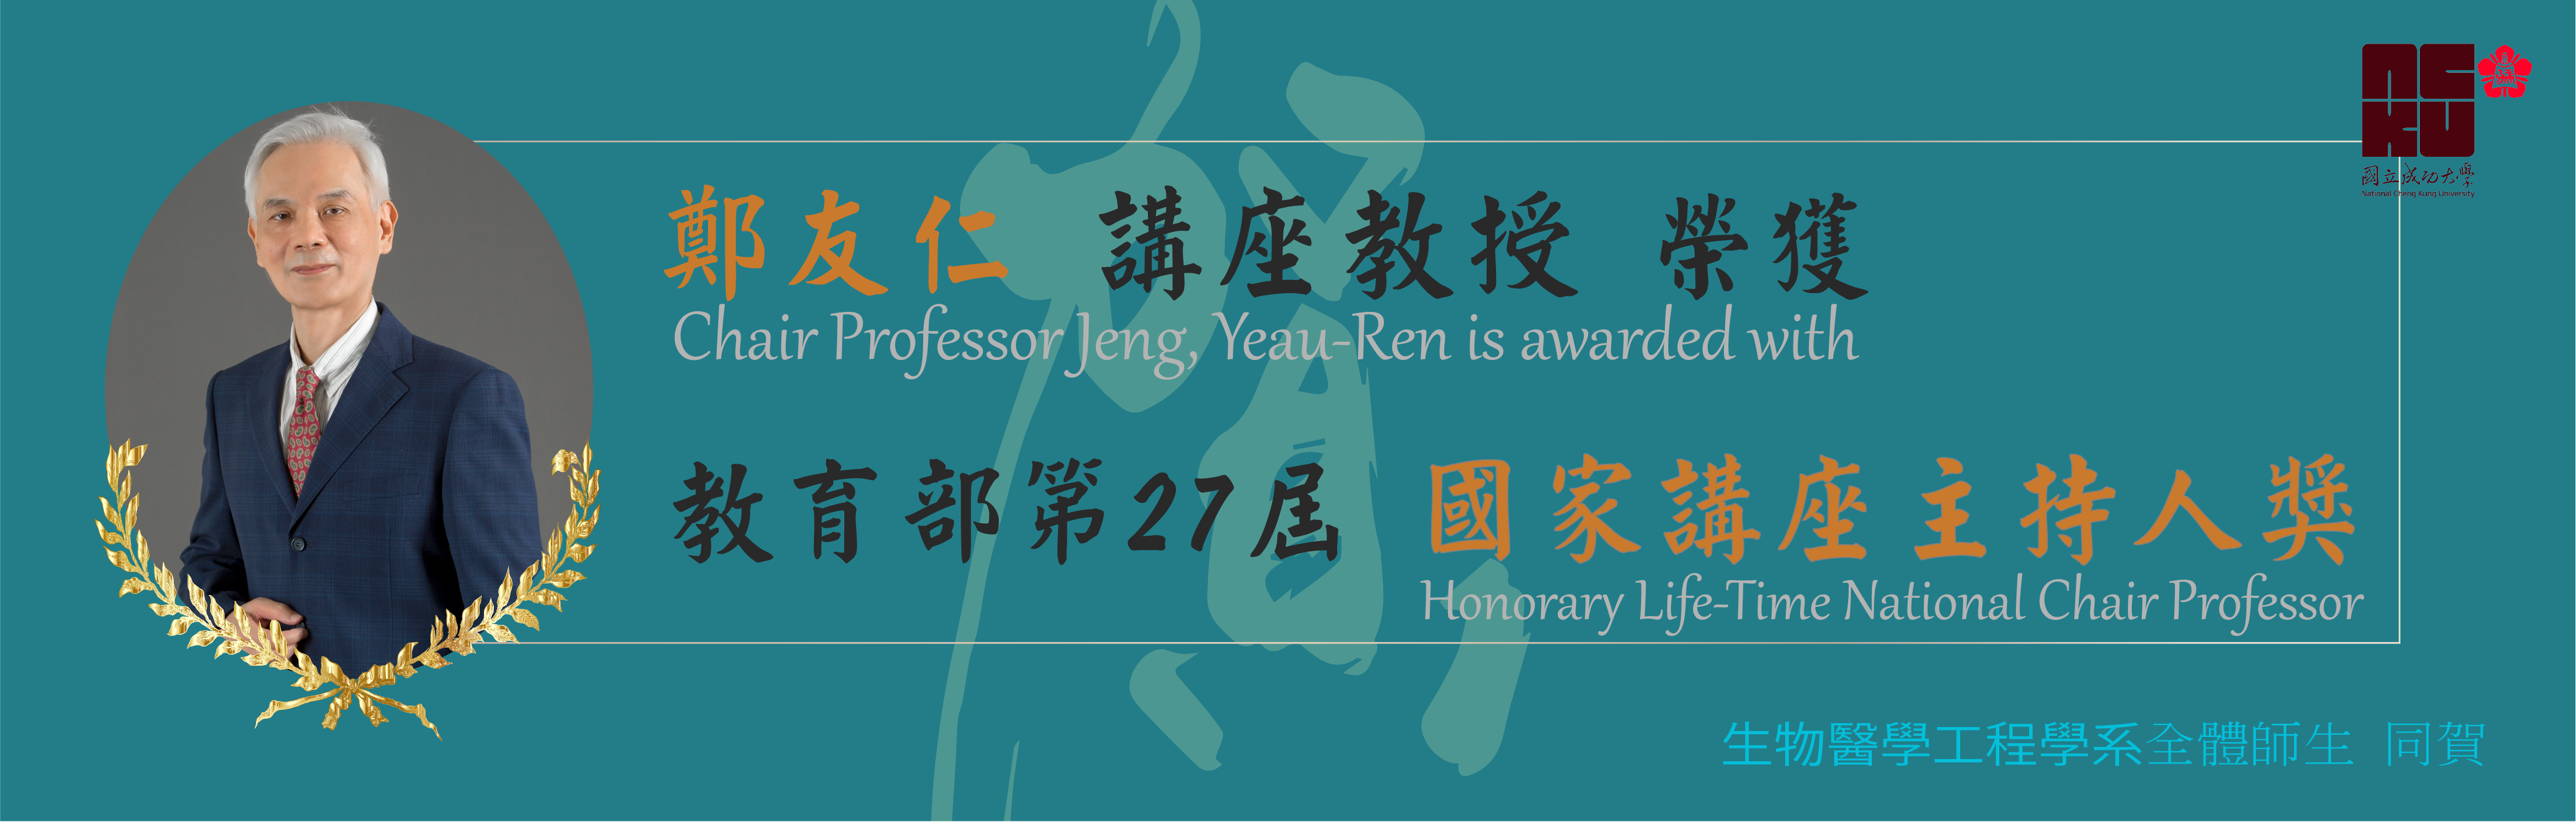 Dr. Jeng Yeau-Ren awarded with Honorary Life-Time National Chair Professor